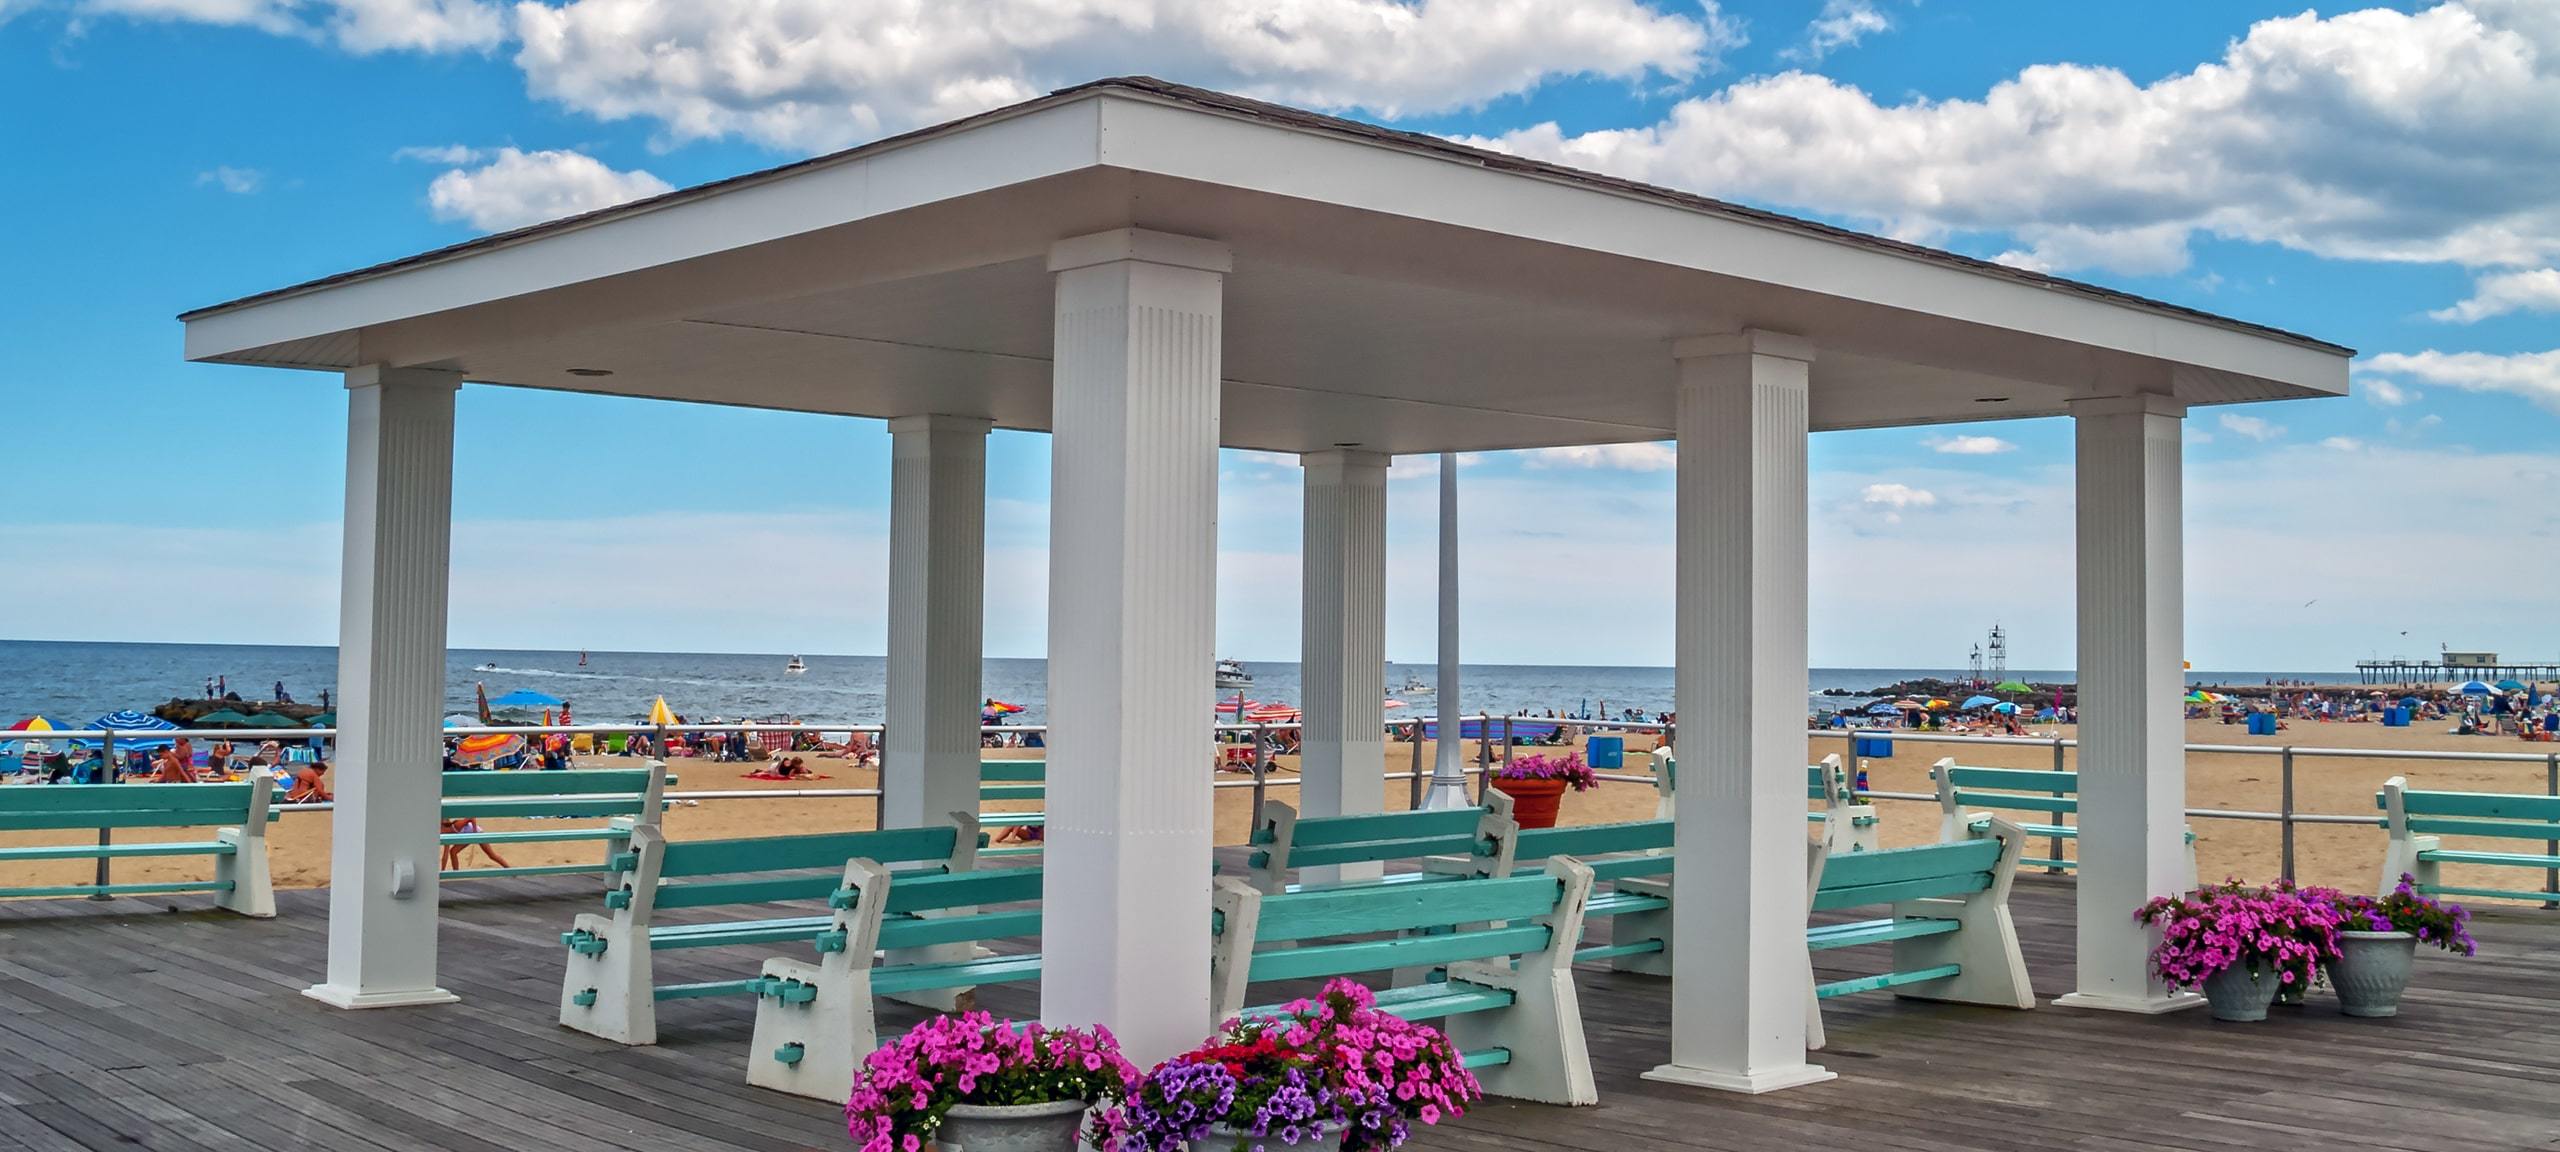 Avon-By-The-Sea pavilion and boardwalk in New Jersey